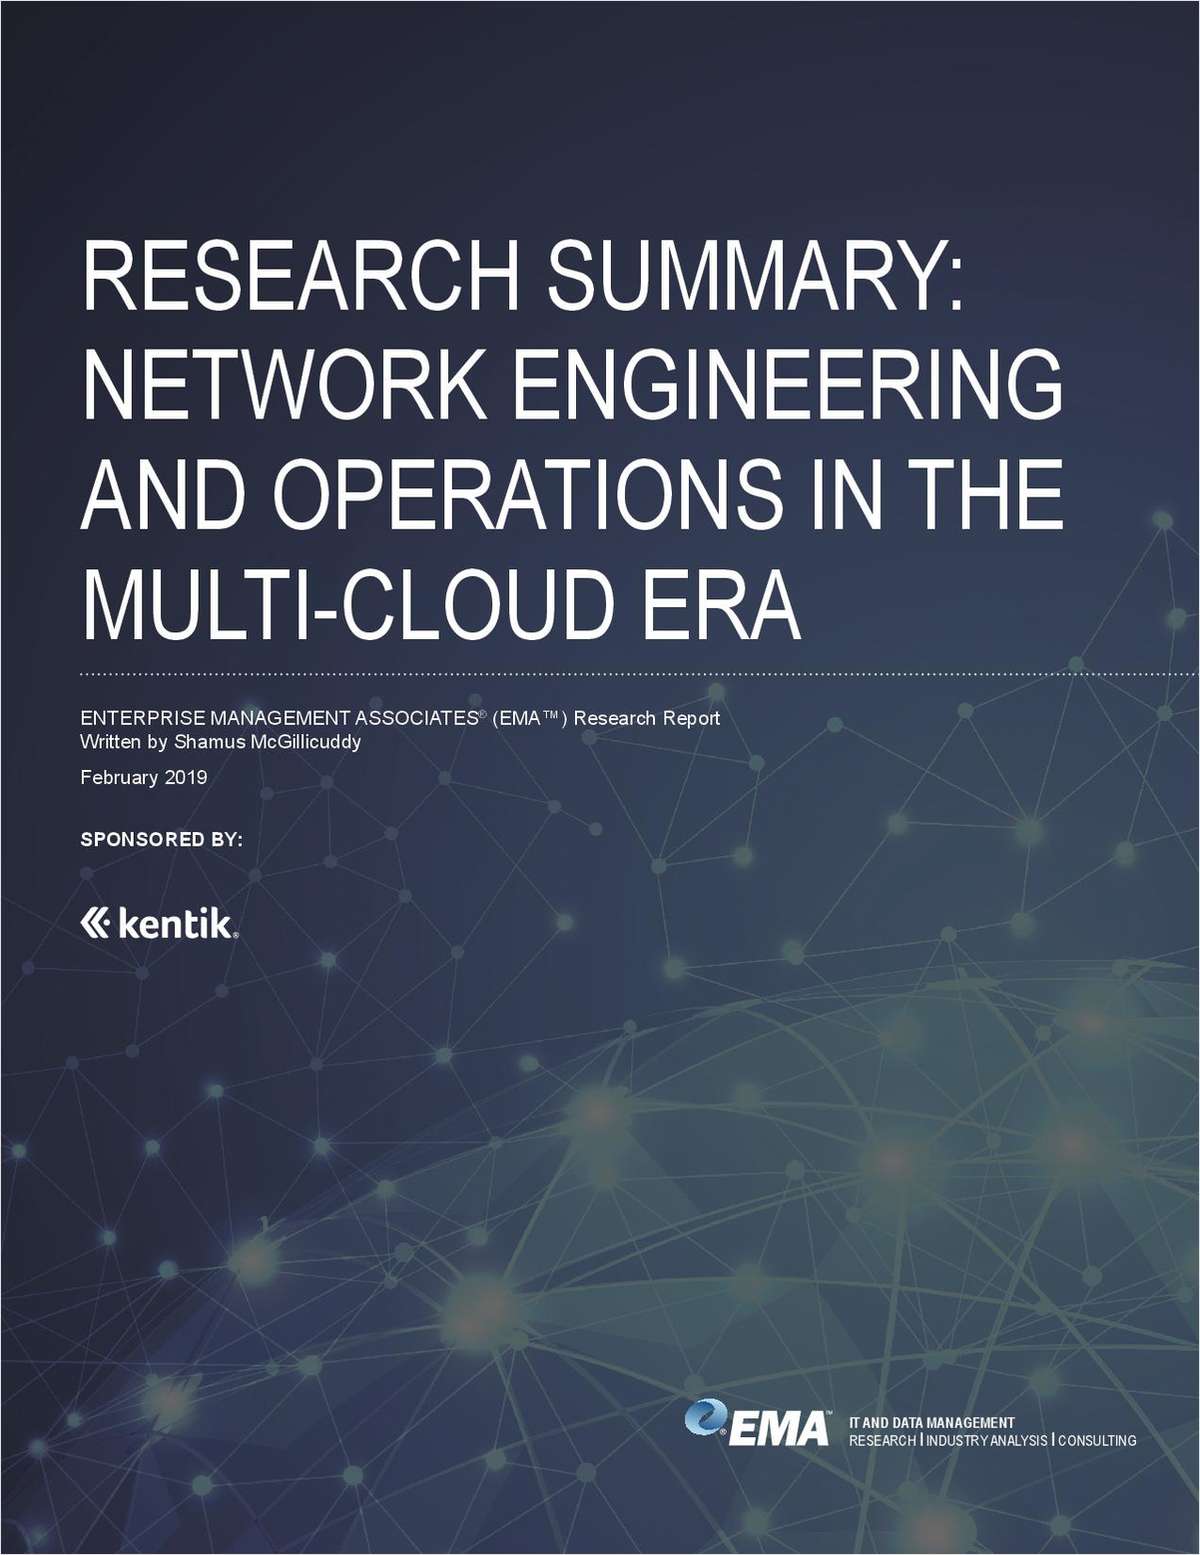 Network Engineering and Operations in the Multi-Cloud Era